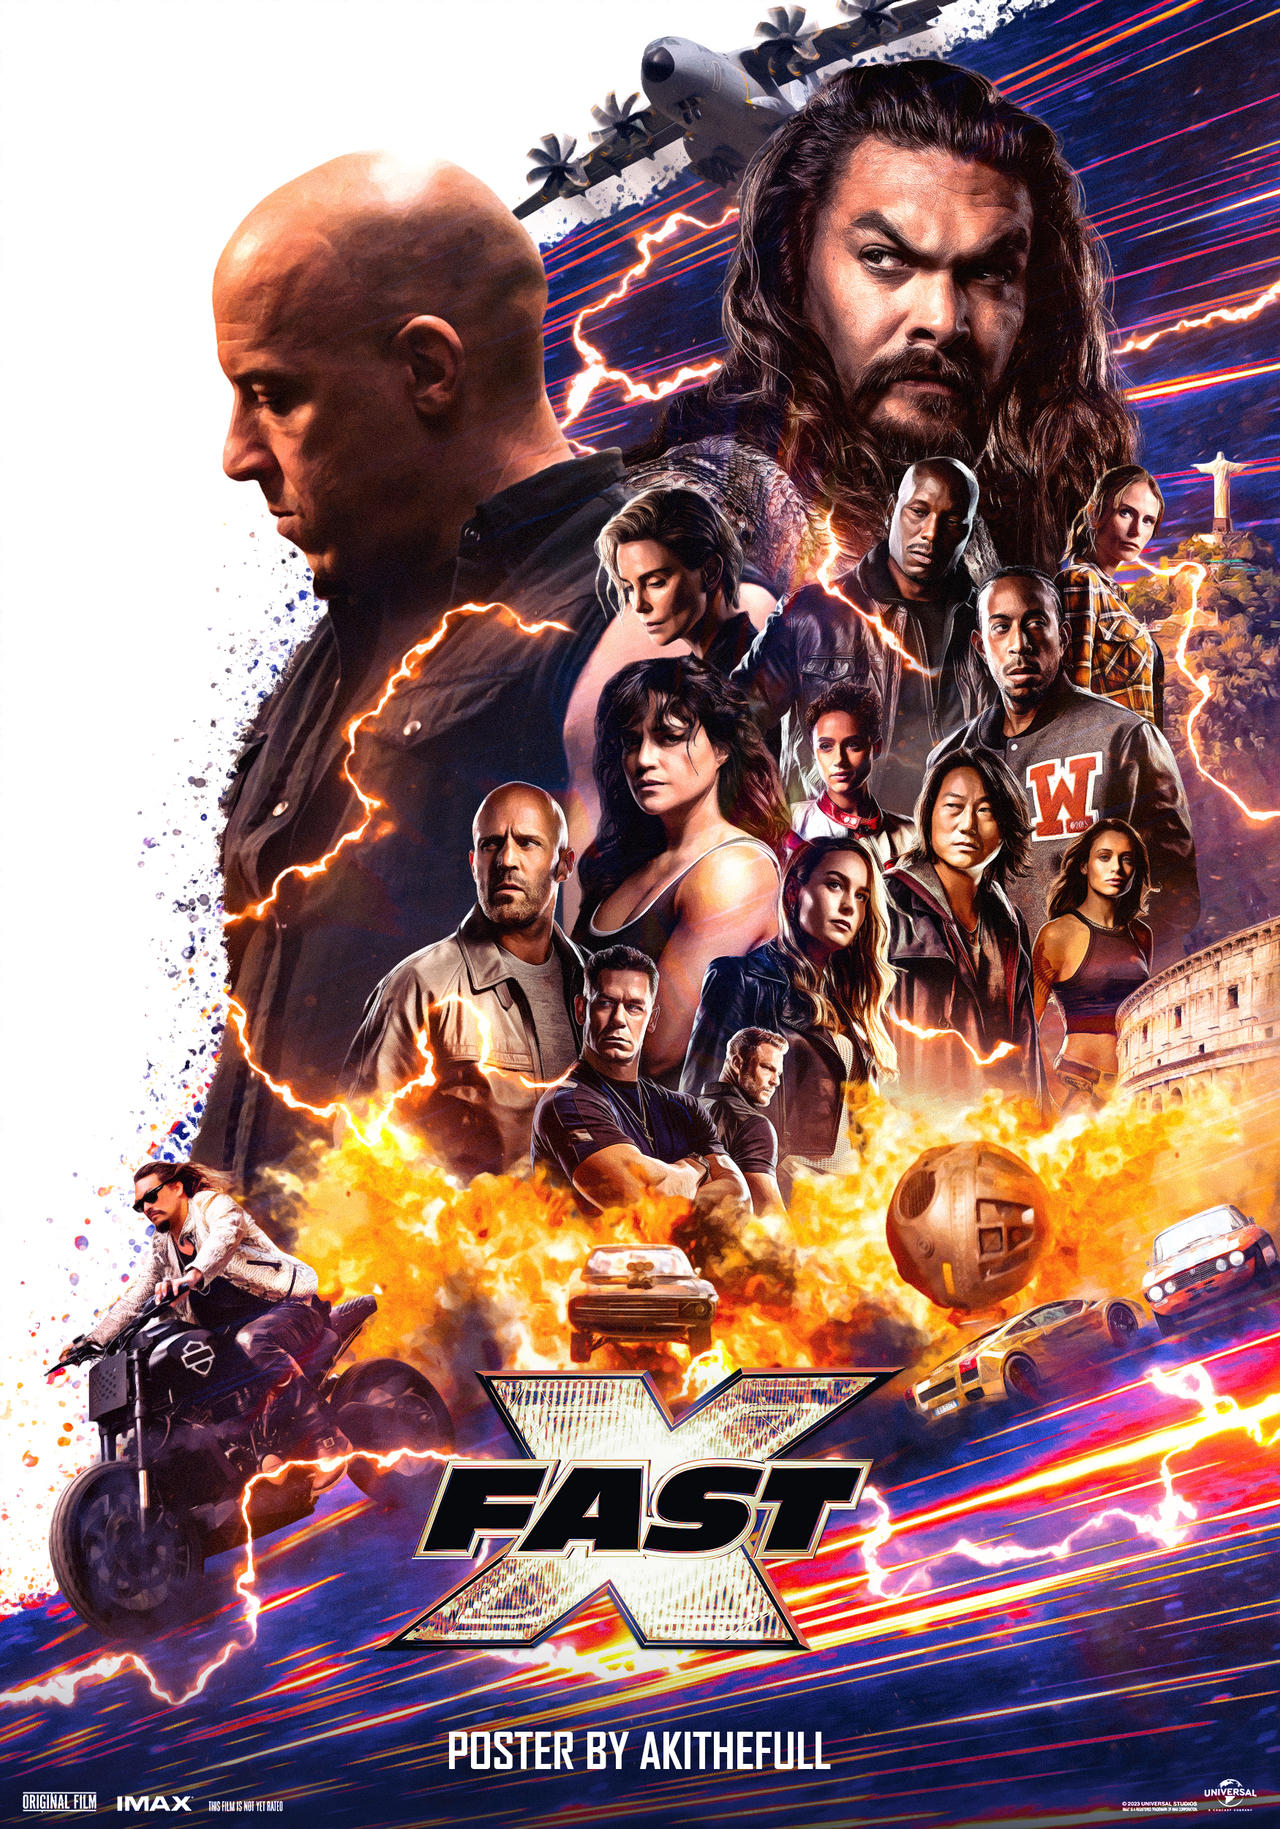 Fast X Gets a New Poster